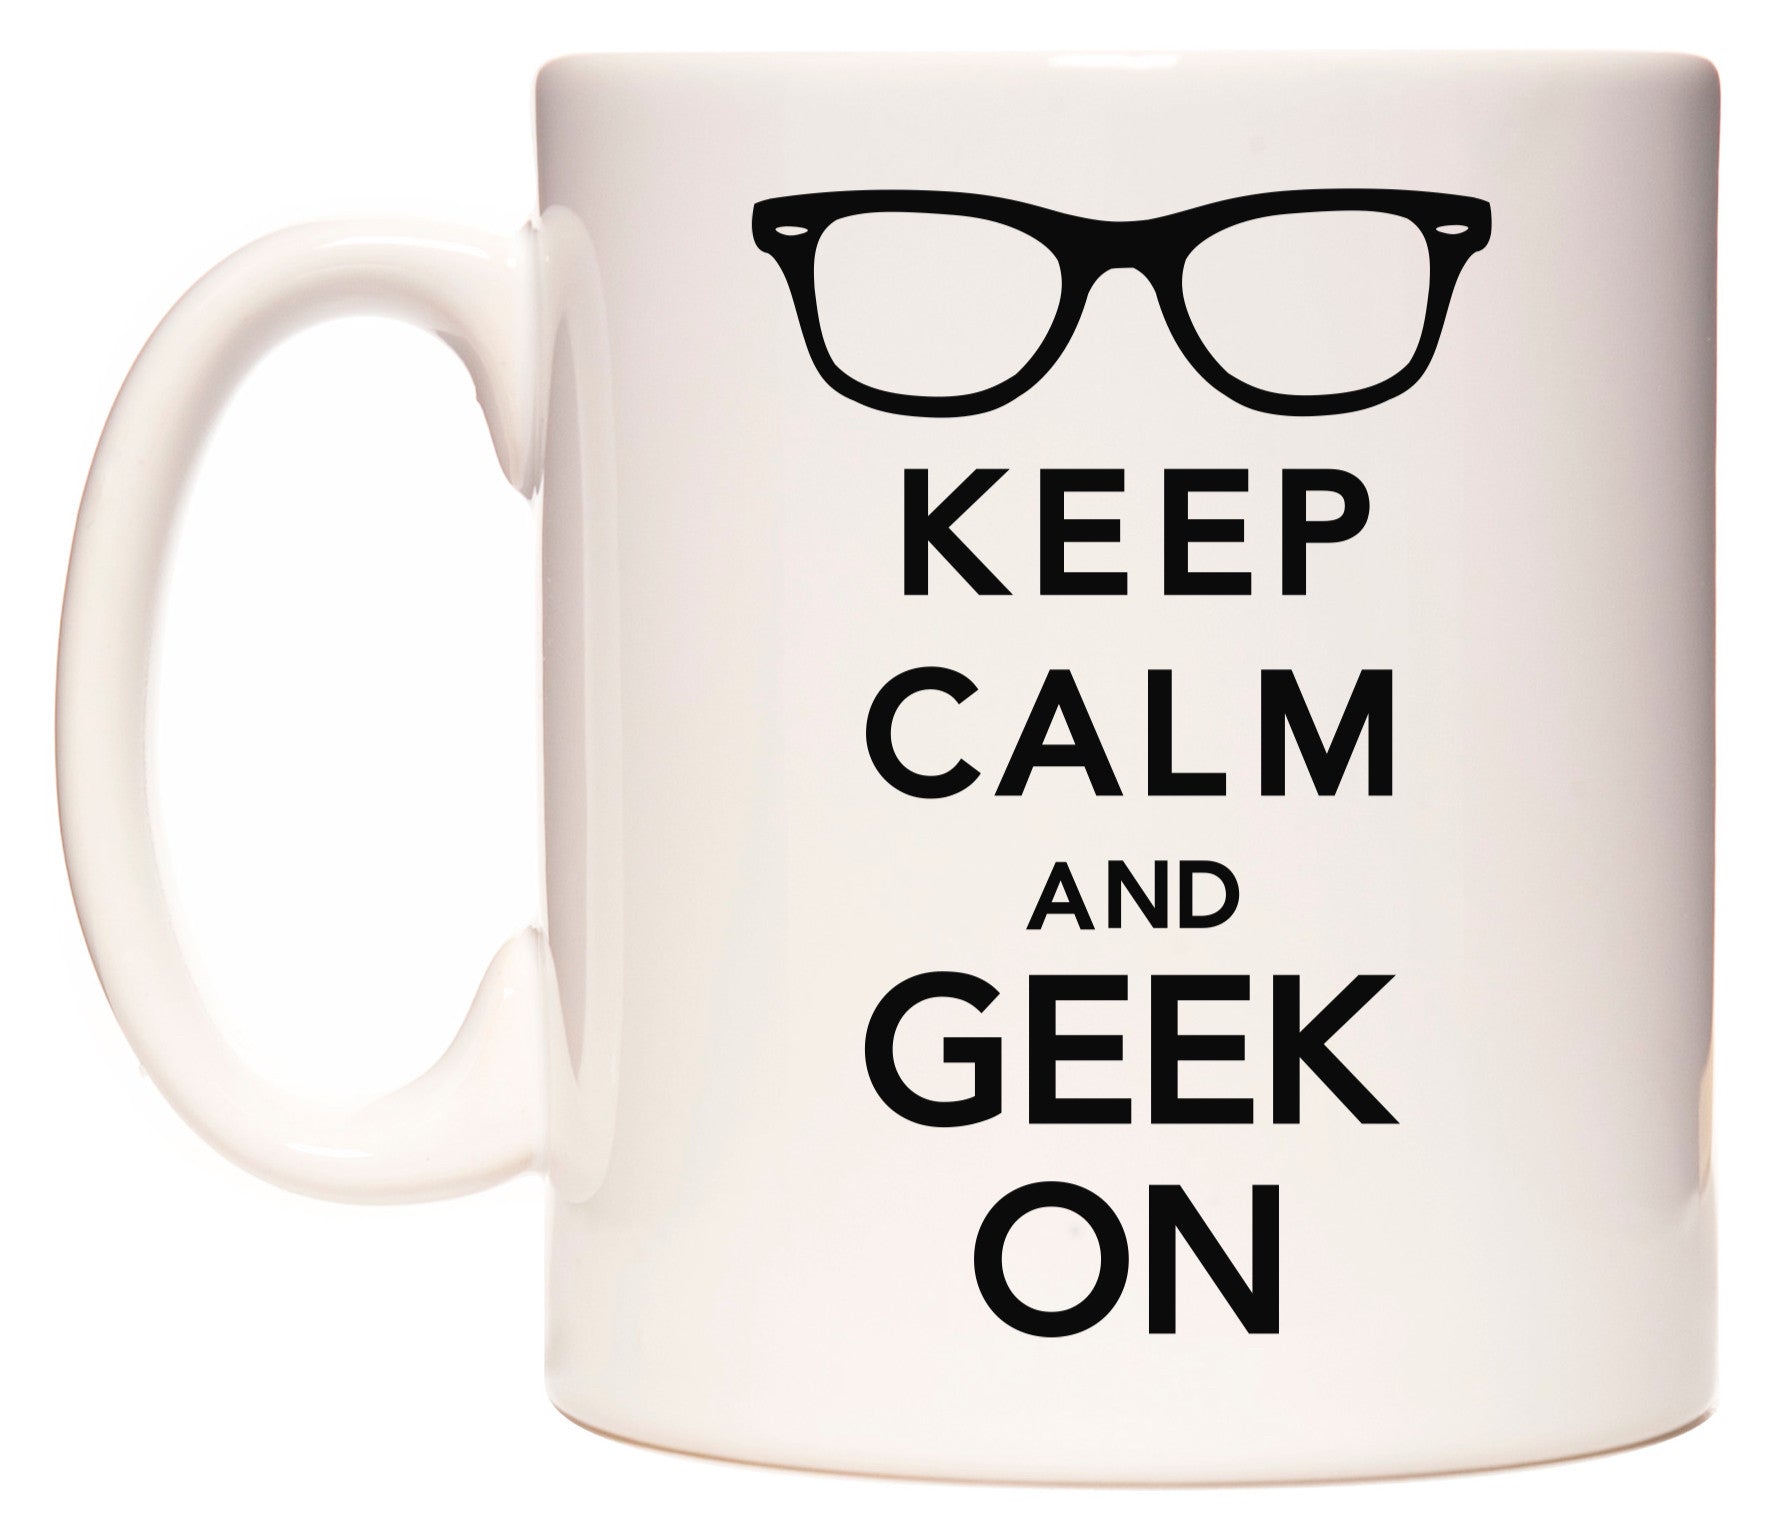 This mug features KEEP CALM AND GEEK ON